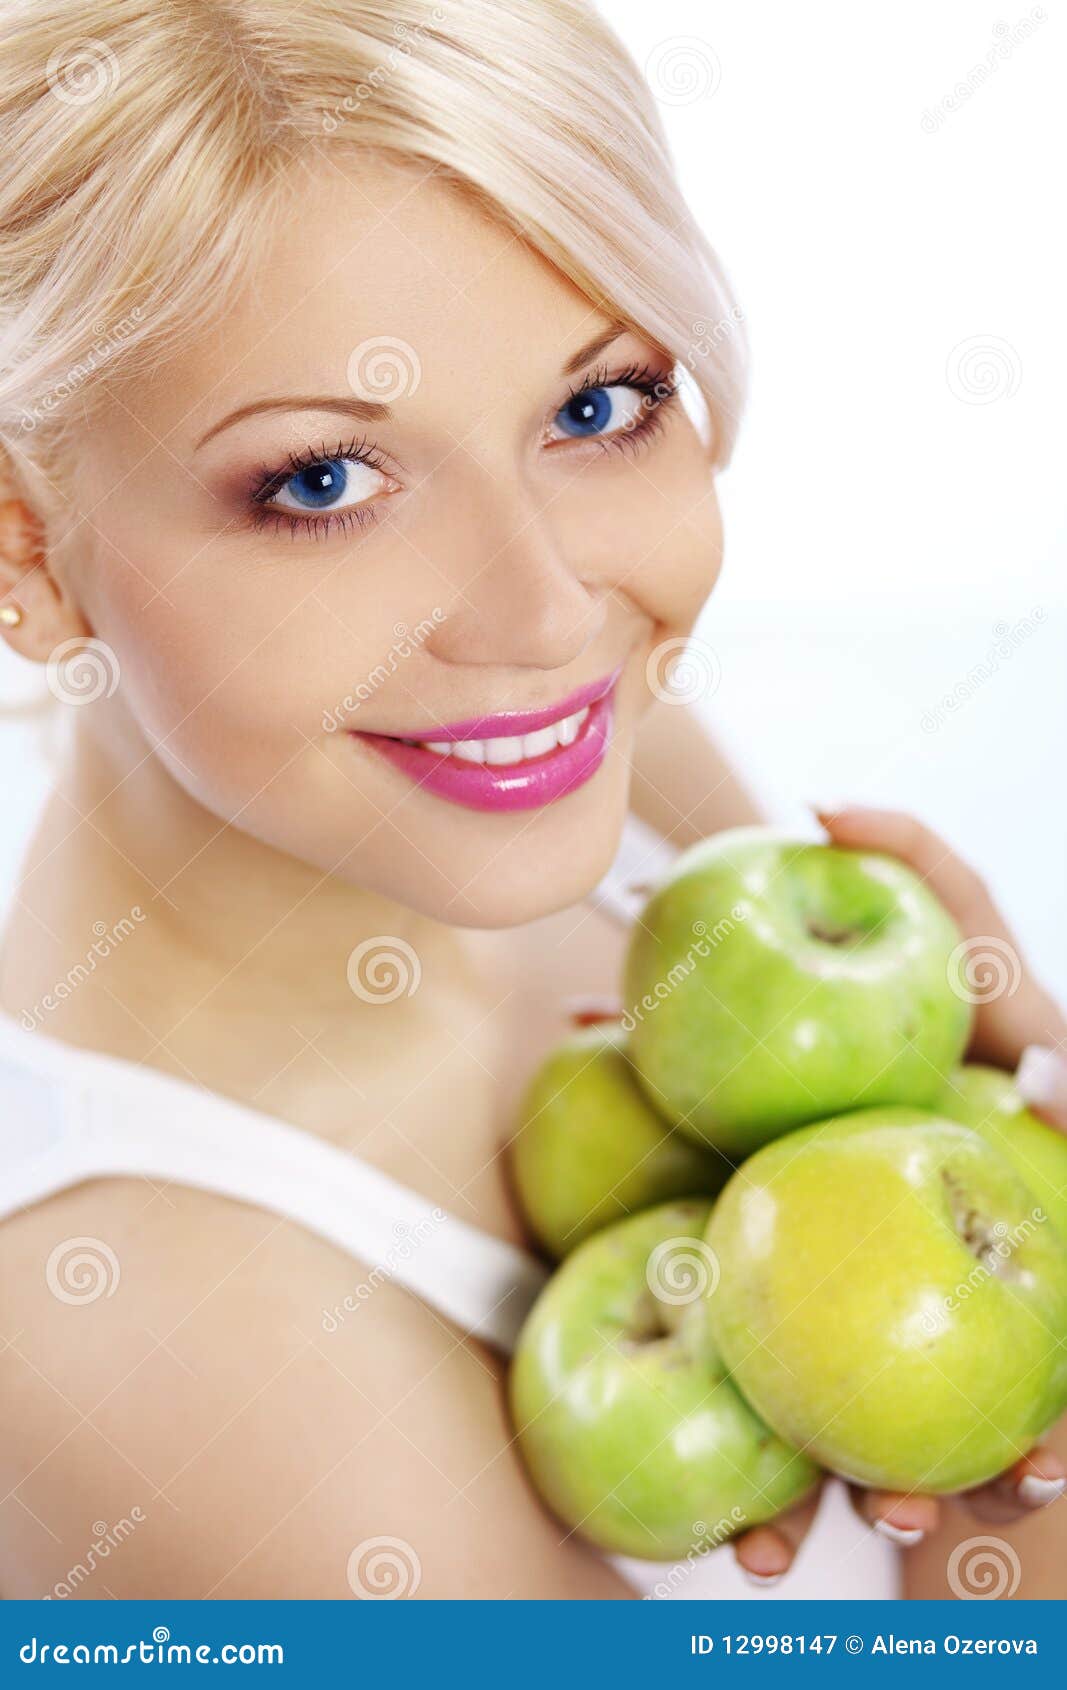 Healthy Lifestyle Royalty Free Stock Photography - Image: 12998147